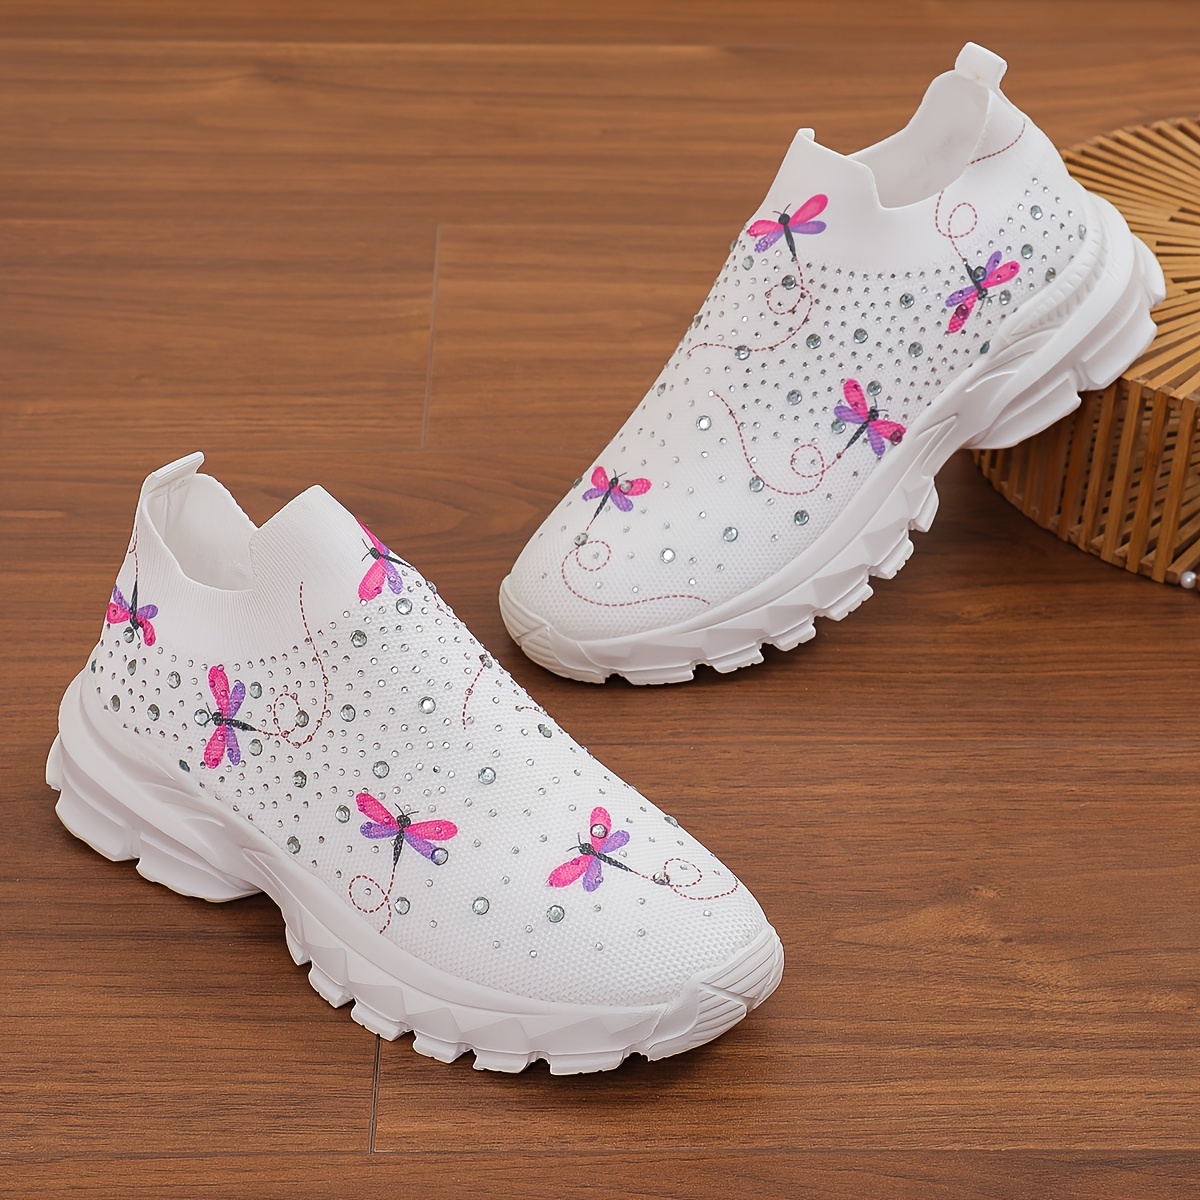 

Women's Dragonfly Pattern Sock Sneakers, Rhinestone Knitted Slip On Sports Shoes, Casual Breathable Walking Shoes